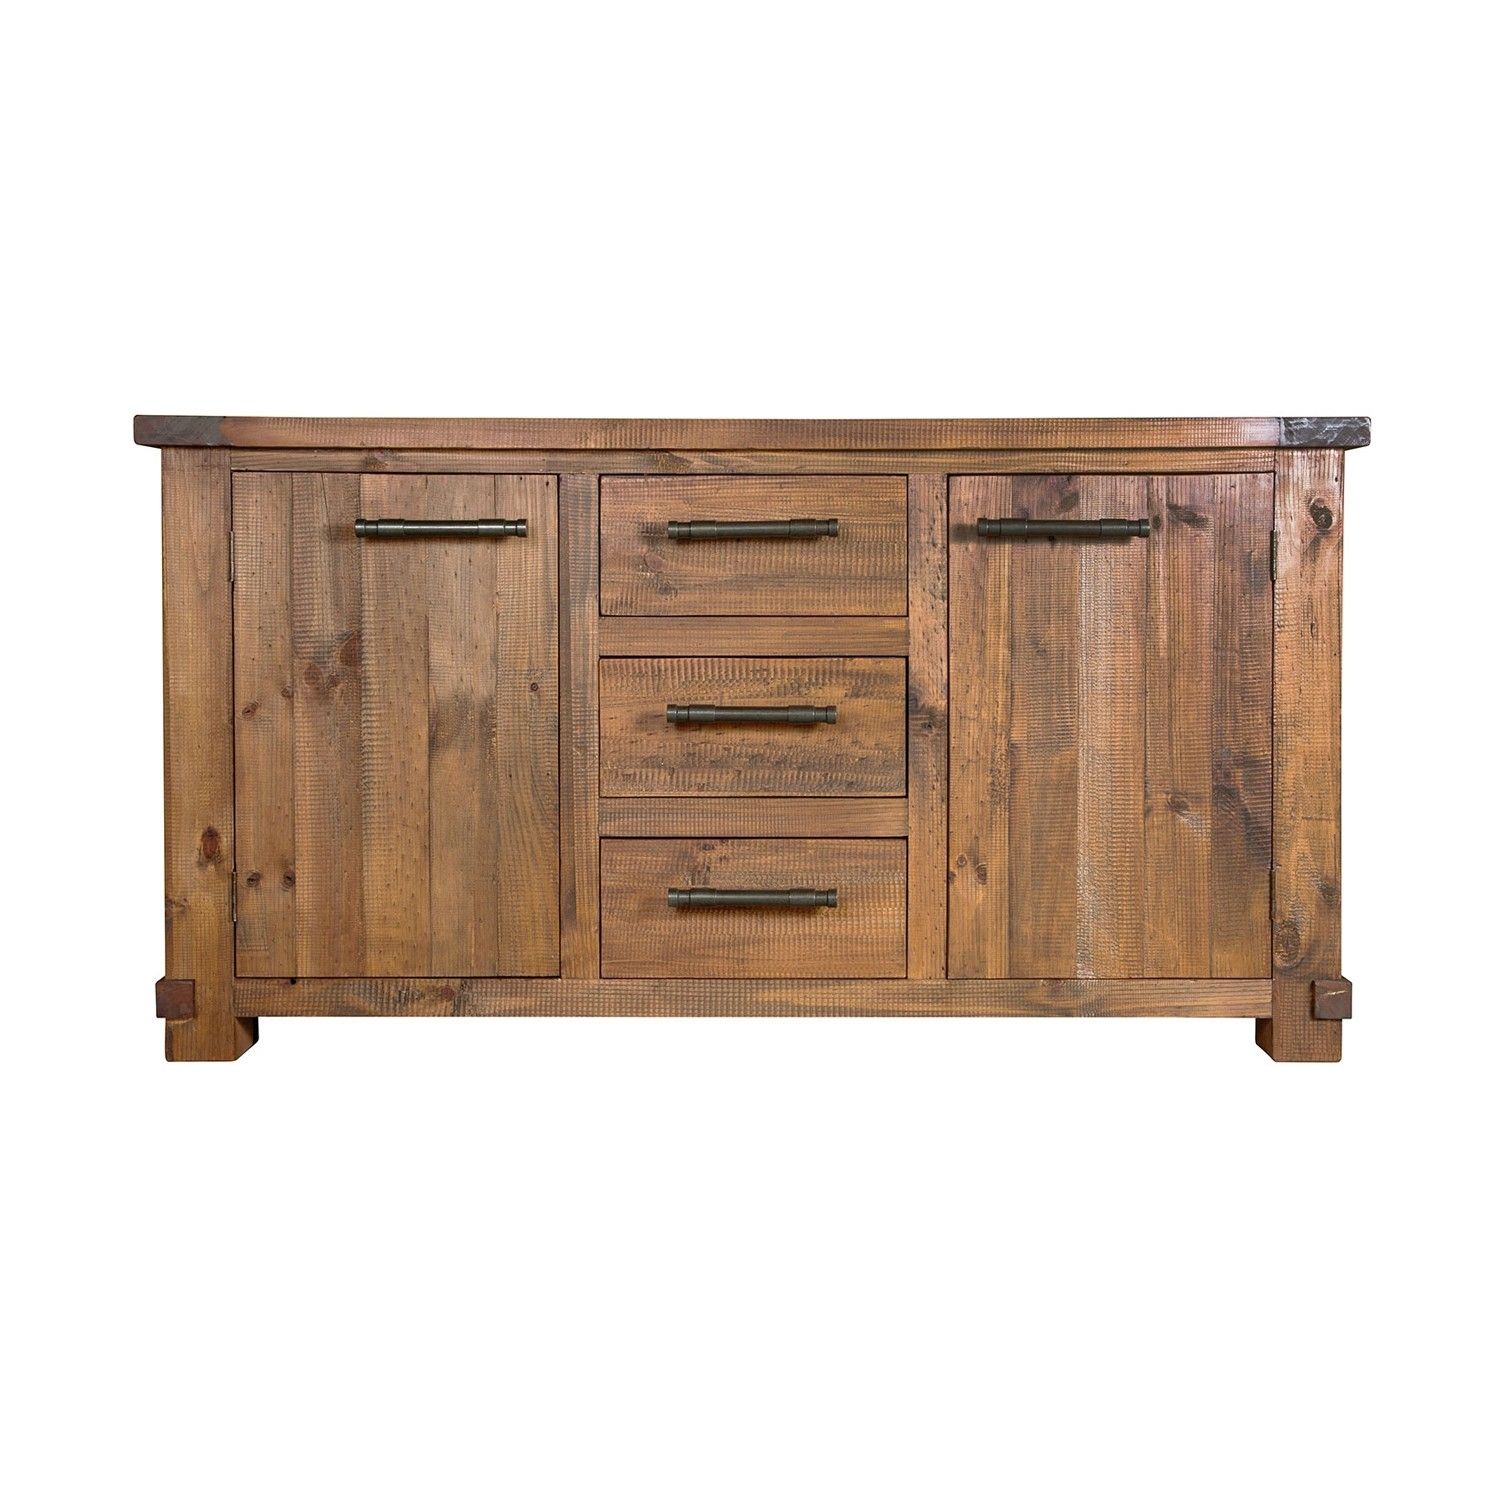 Buffets, Cabinets And Sideboards | Bois & Cuir Pertaining To Most Current Metal Framed Reclaimed Wood Sideboards (View 15 of 20)